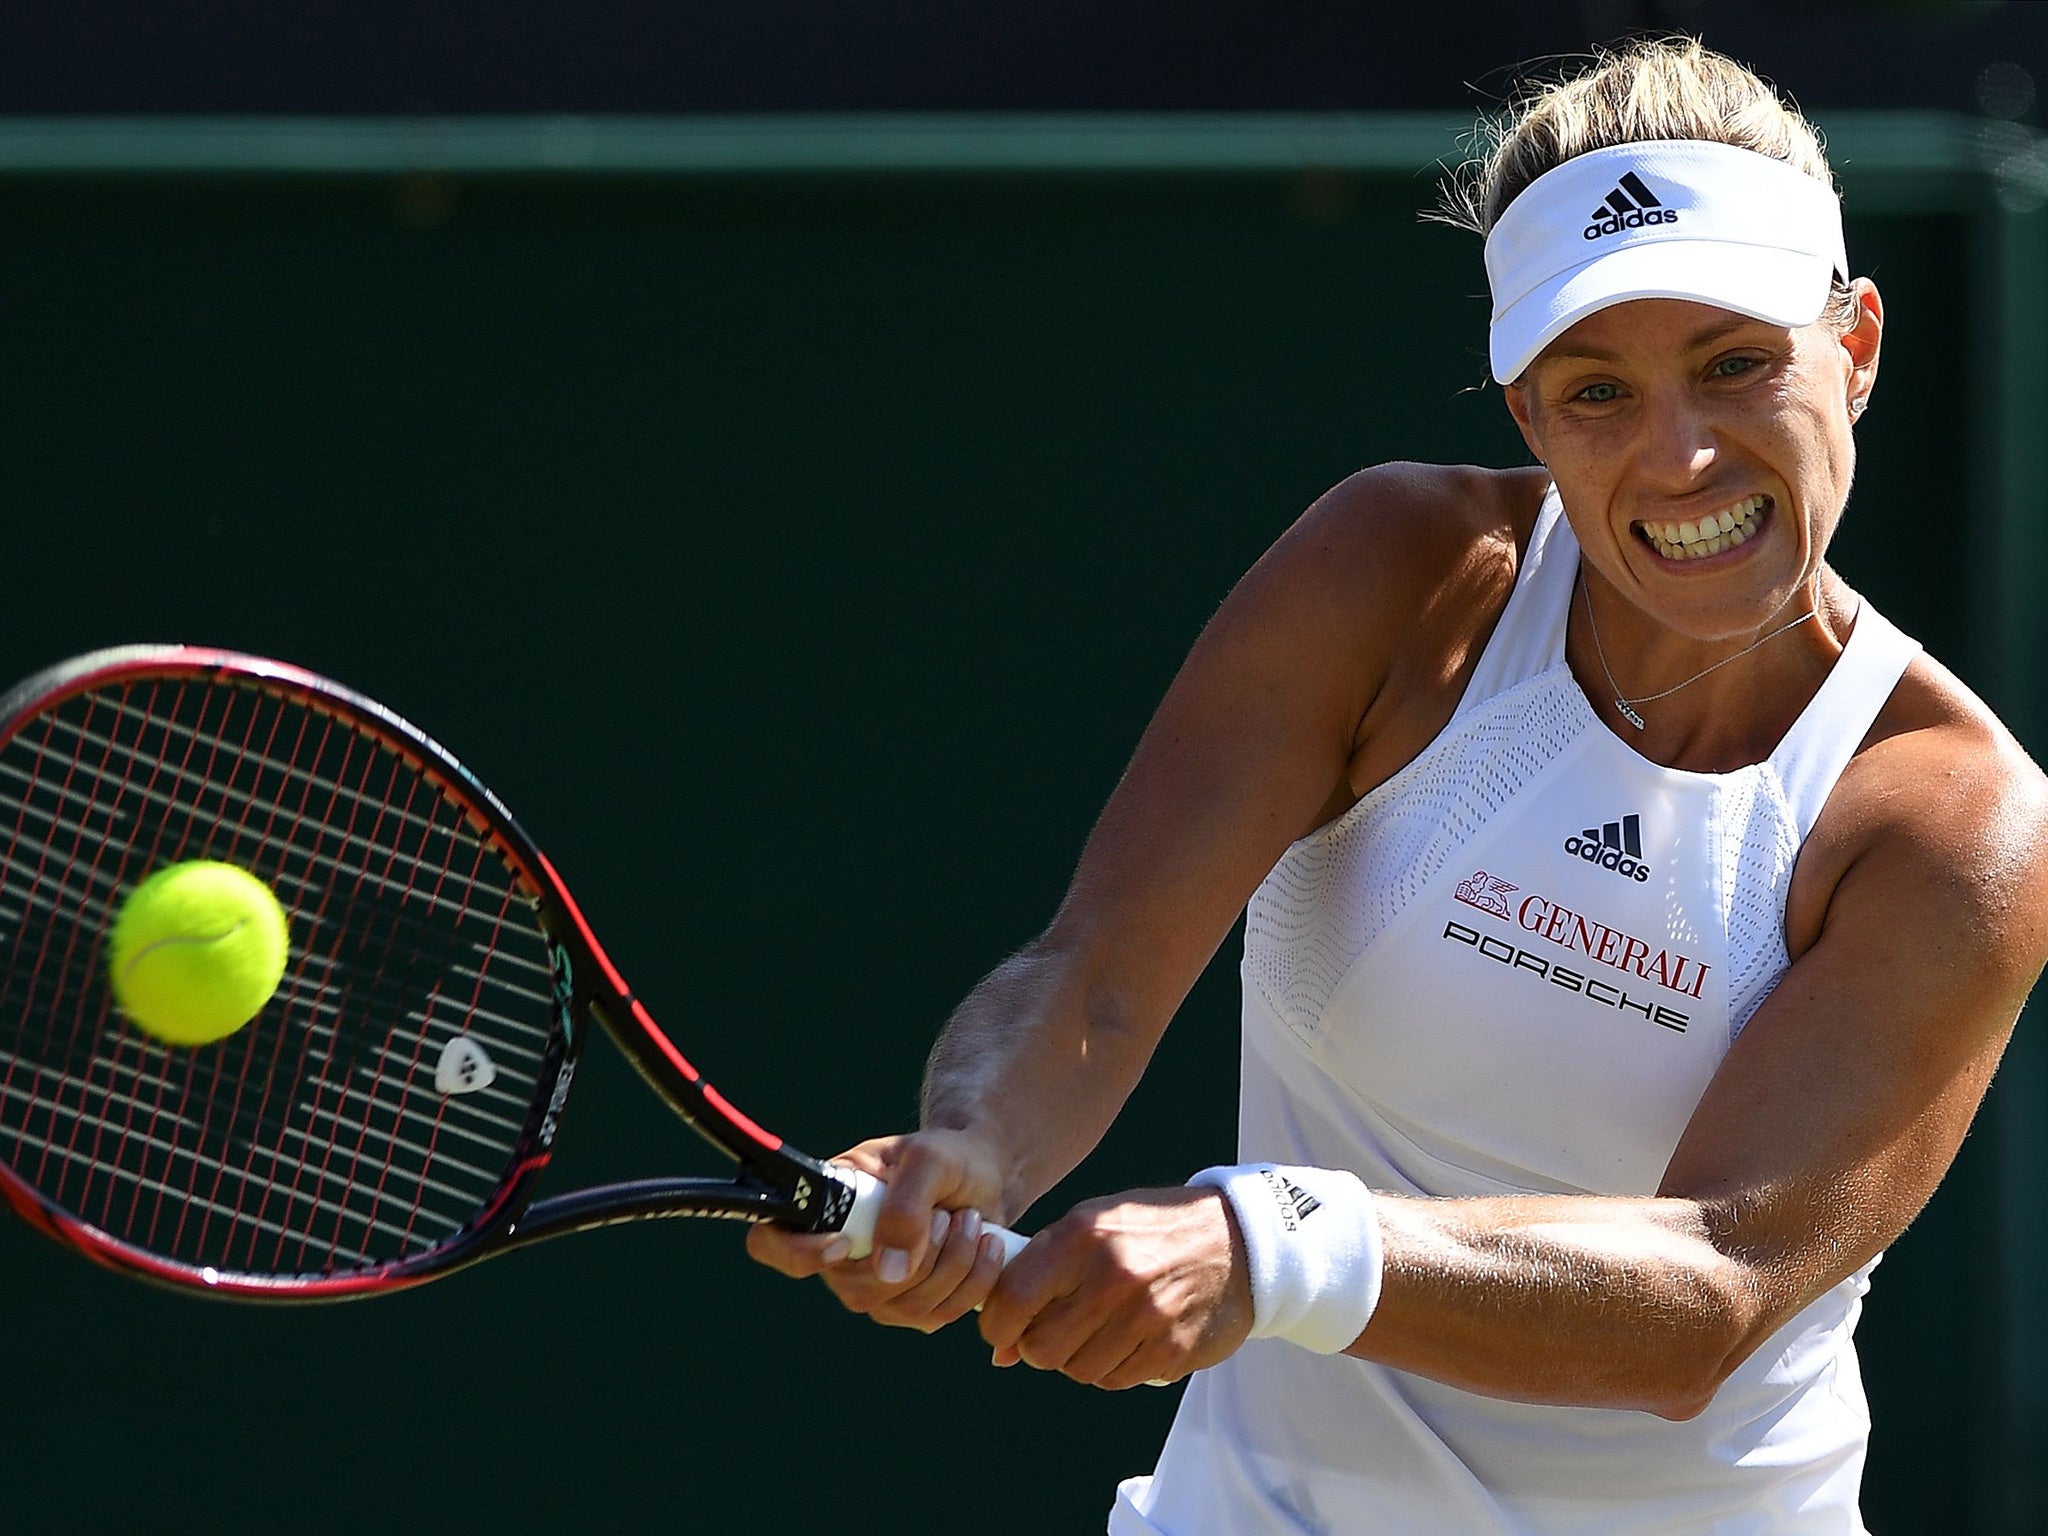 Angelique Kerber survived a major scare to reach the fourth round